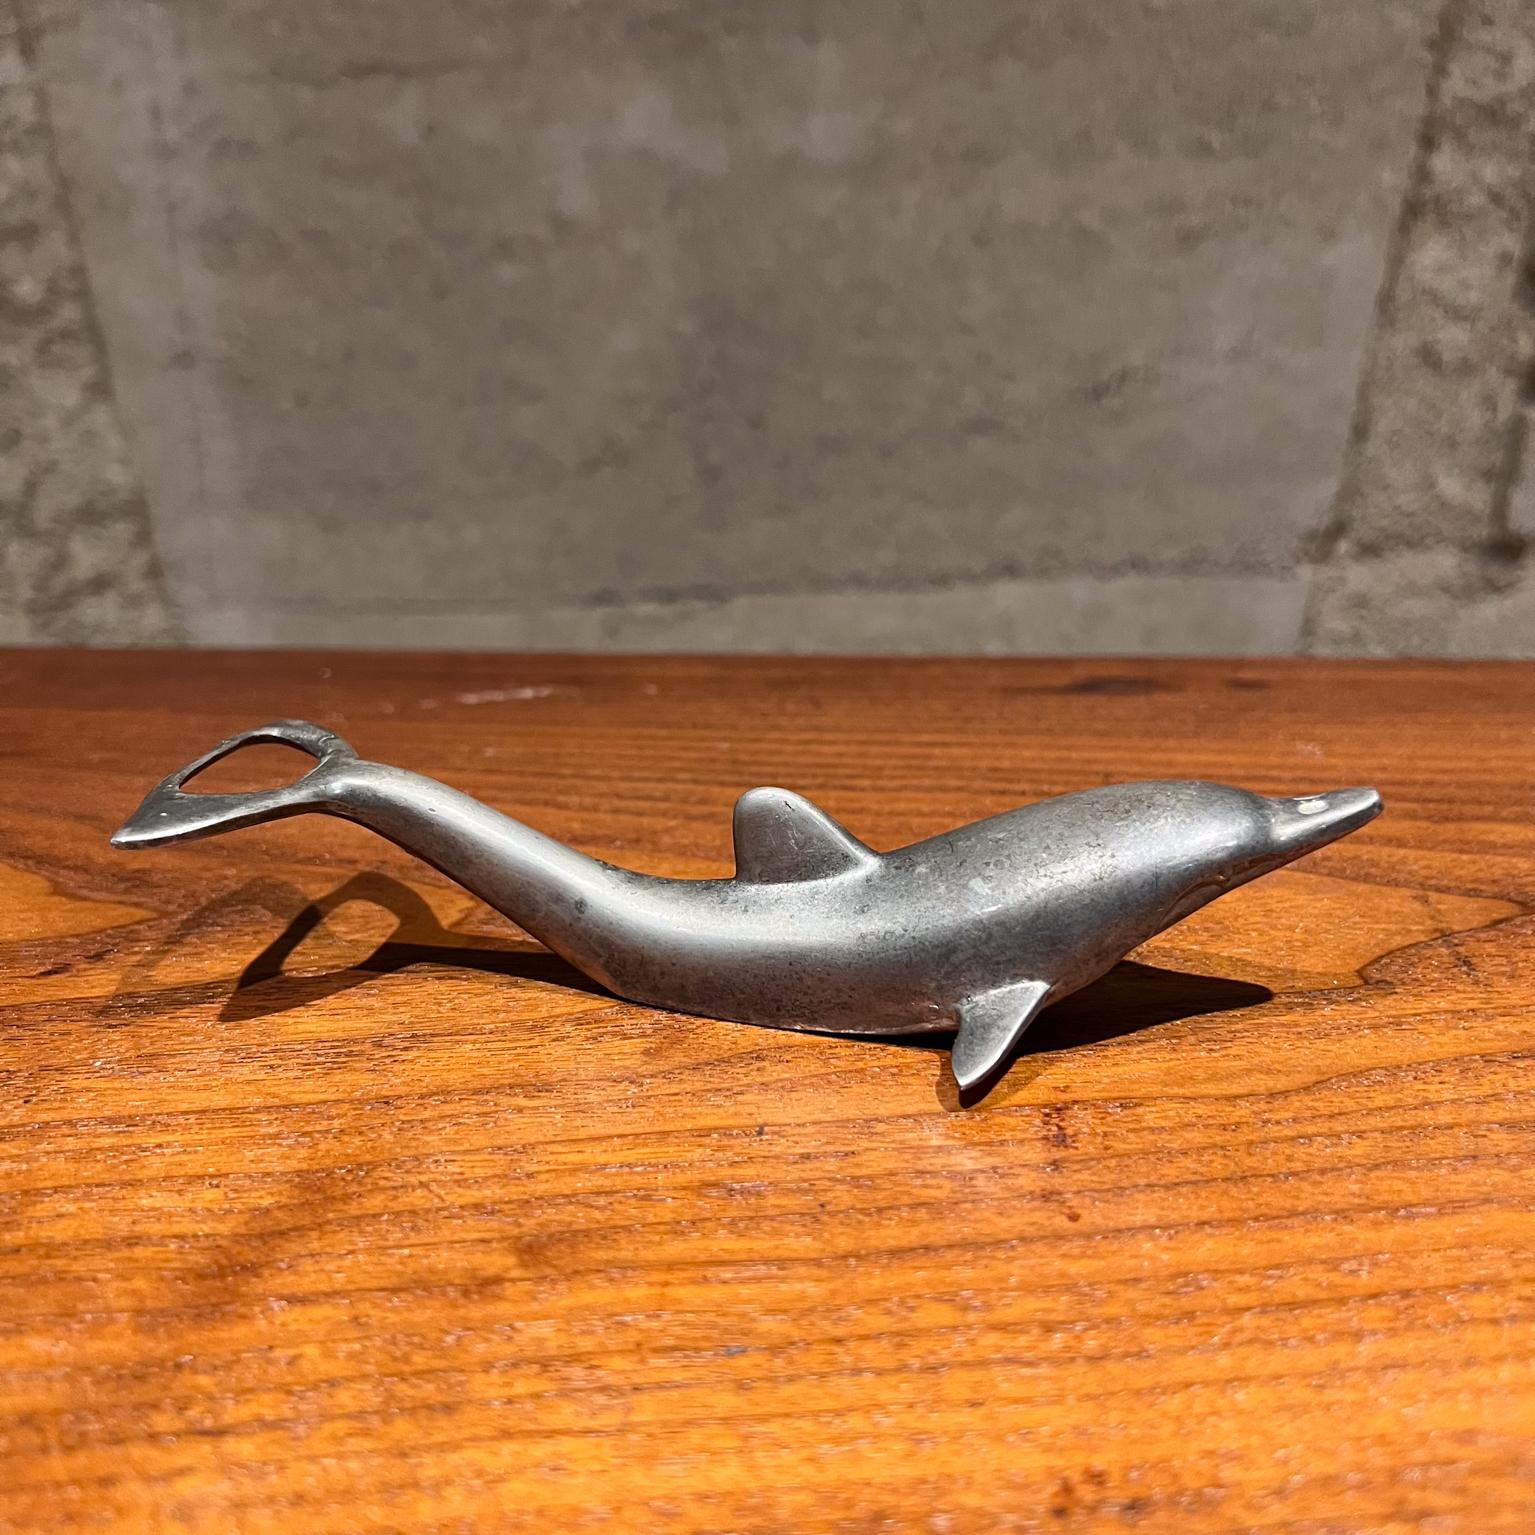 
Silver Plate Dolphin Bottle Opener
Midcentury Mad Barware
2 h x 6.5 long x 2.38 w
Original vintage condition unrestored
Refer to images.